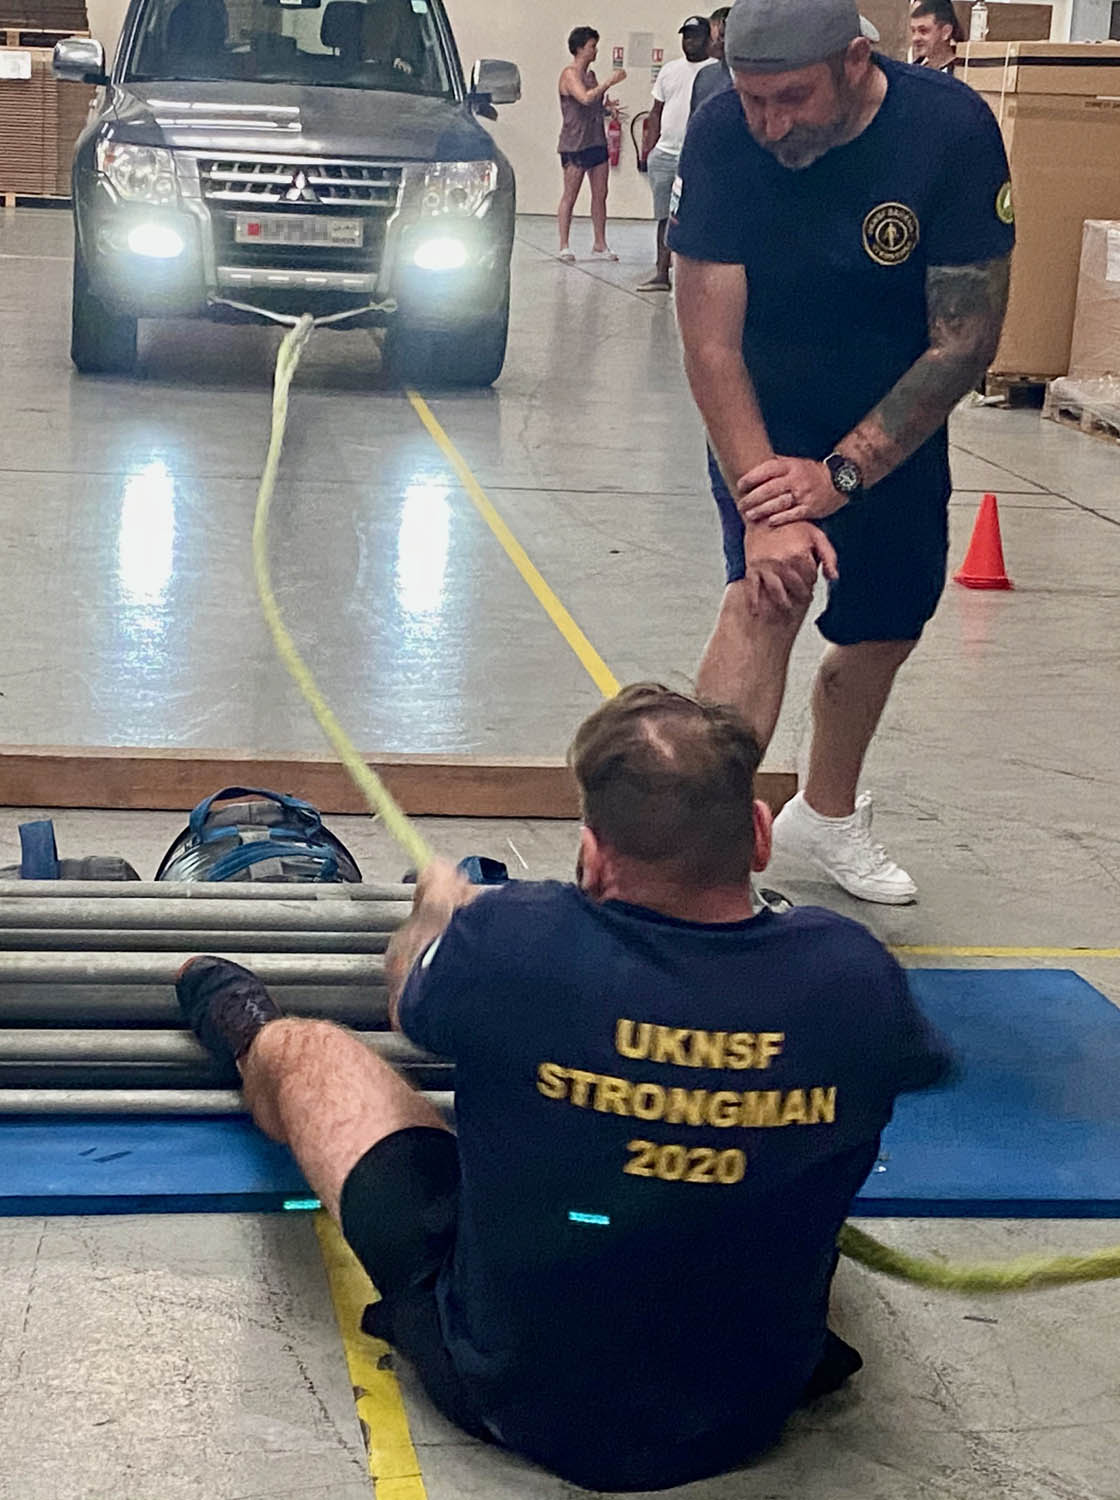 A Royal Navy sailor pulls car in strongest man compeition